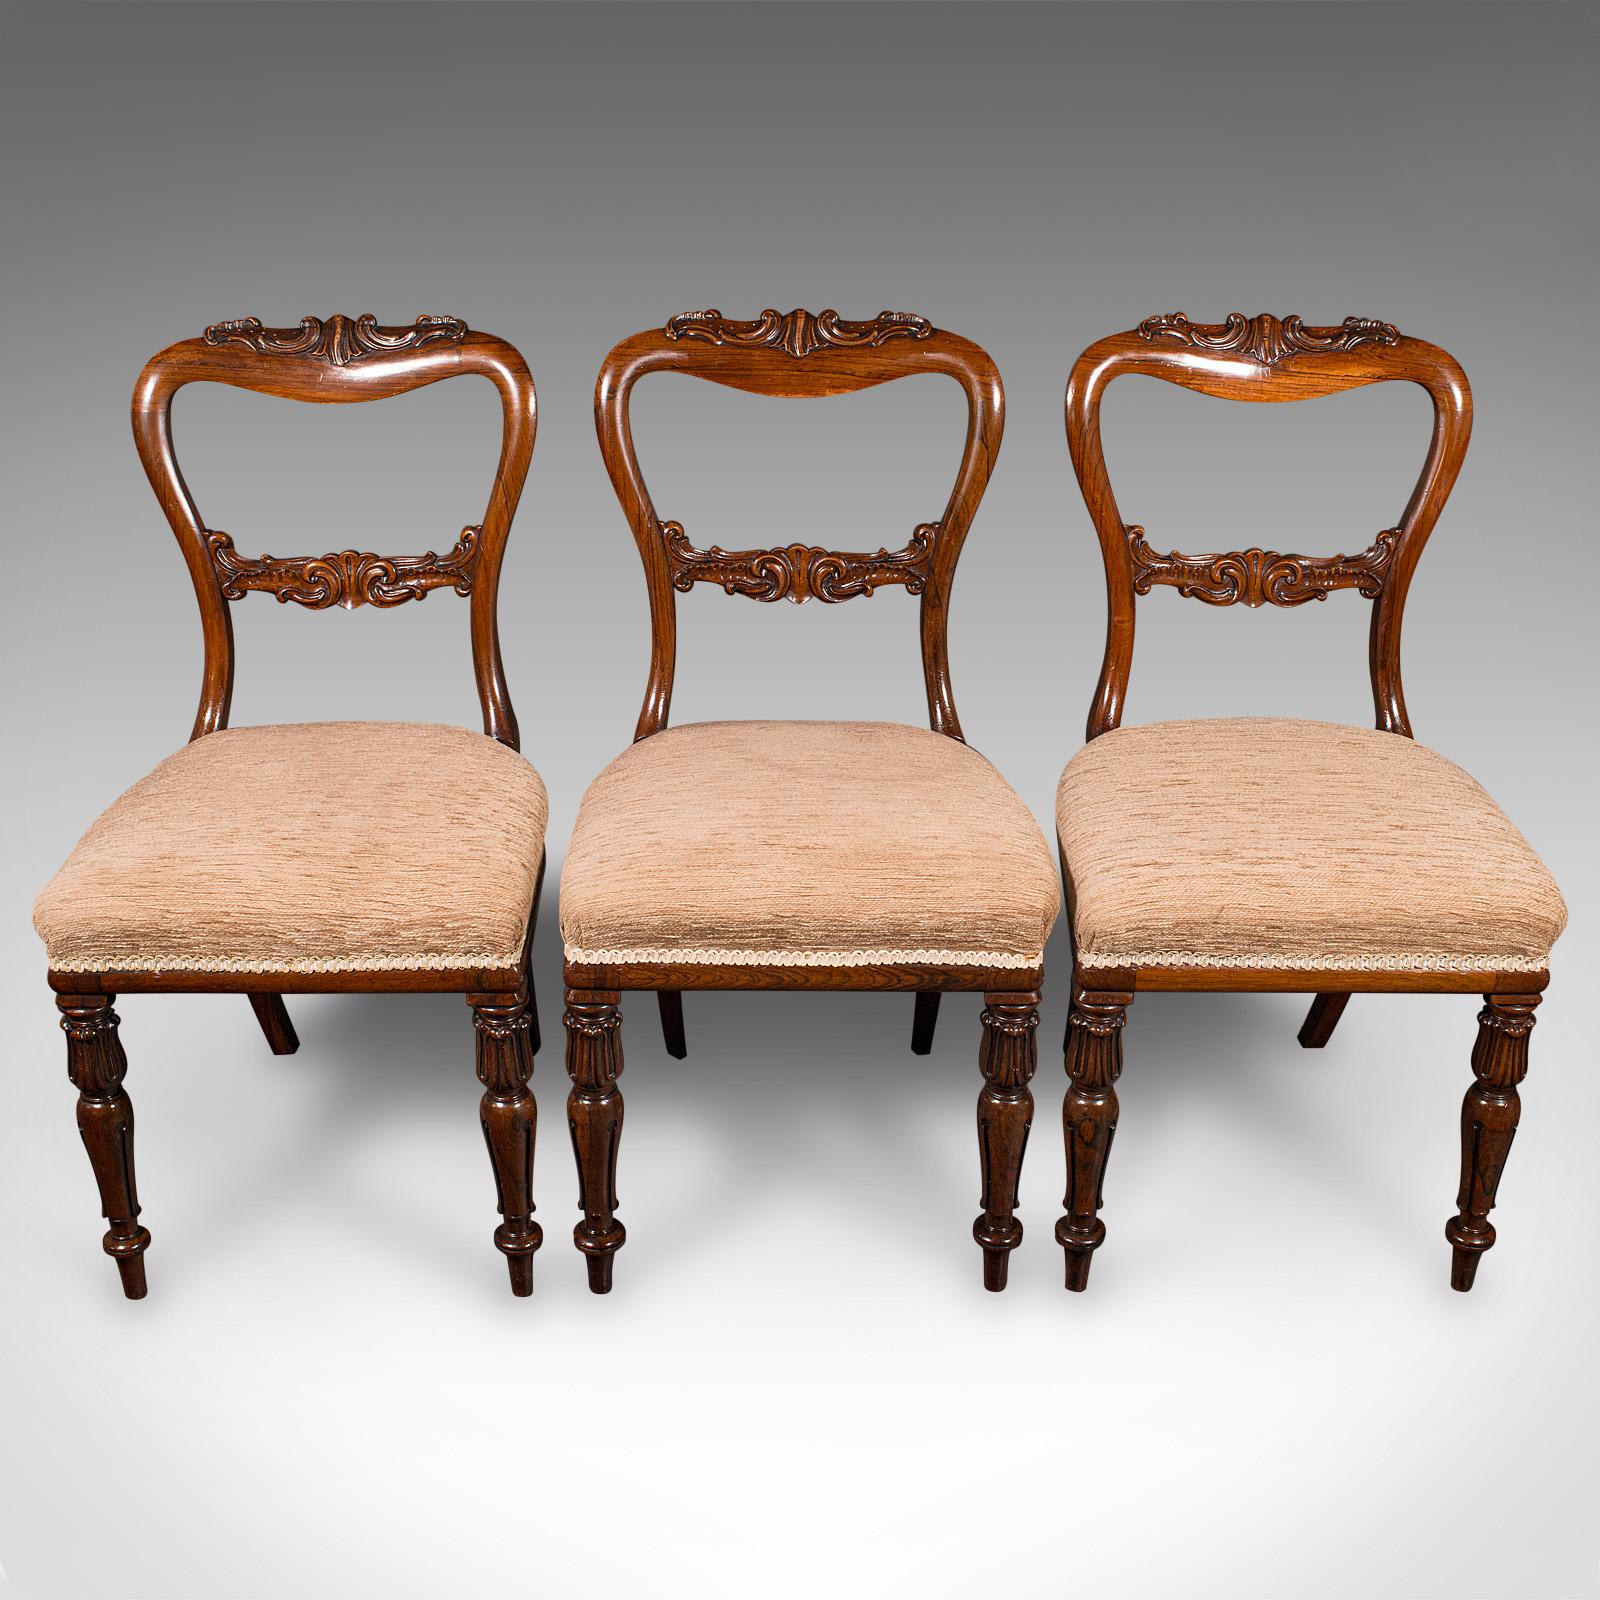 Set Of 5 Antique Dining Chairs, Scottish, Buckle Back Seat, William IV, C.1835 For Sale 1